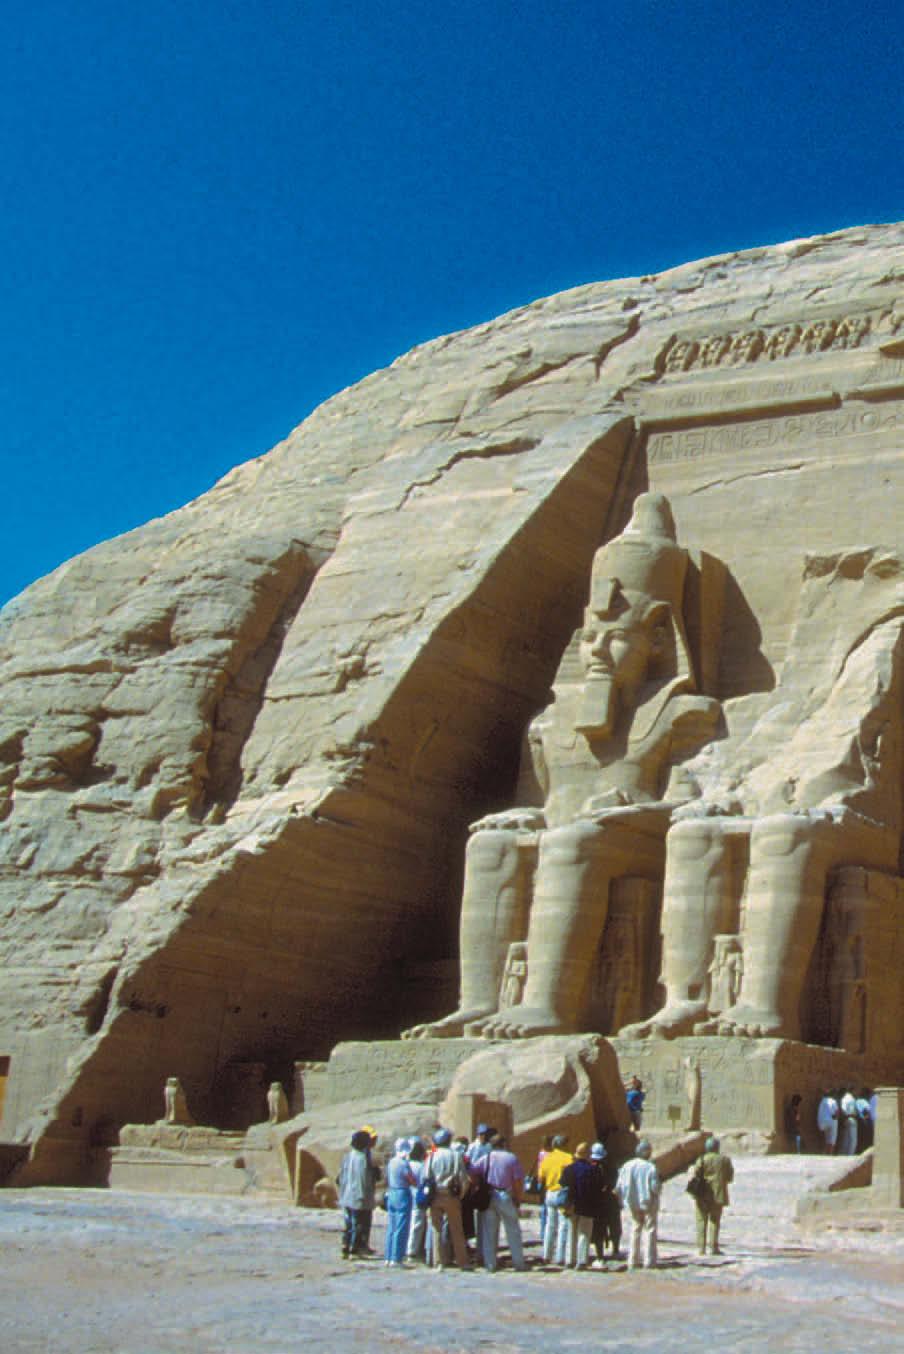 The Great Temple of Ramses II, located in Nubia.